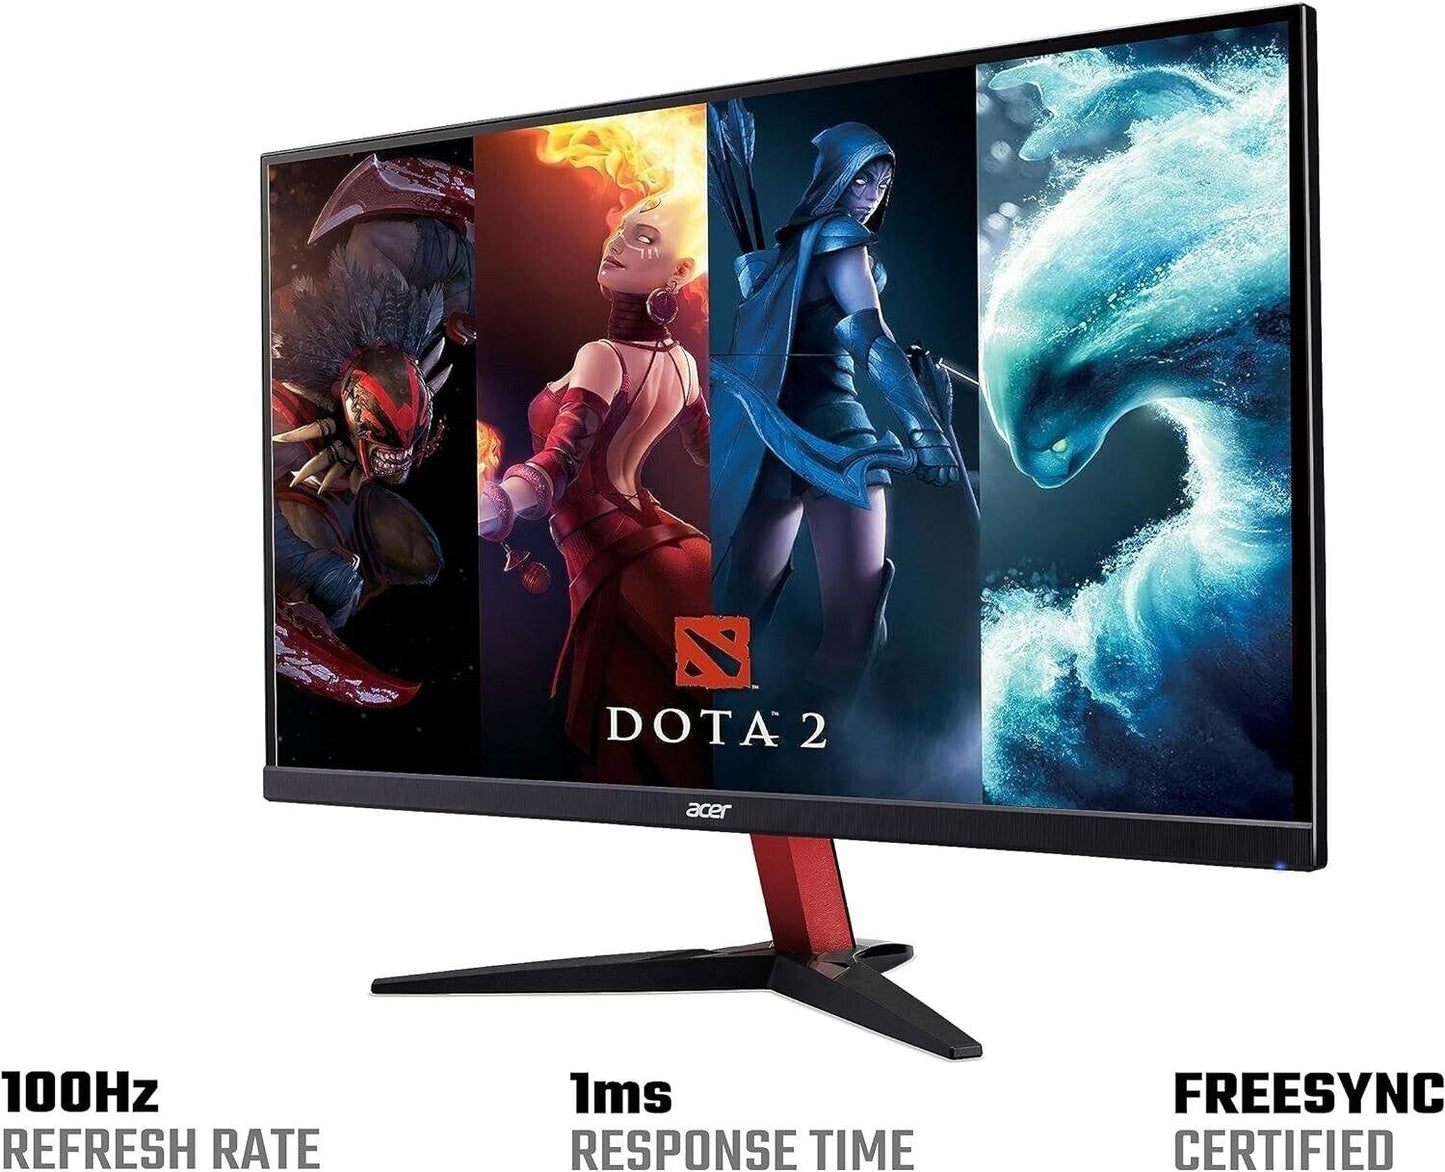 Acer Nitro KG242YE 23.8 Inch 100Hz IPS FHD Gaming Monitor NO STAND - Smart Clear Vision